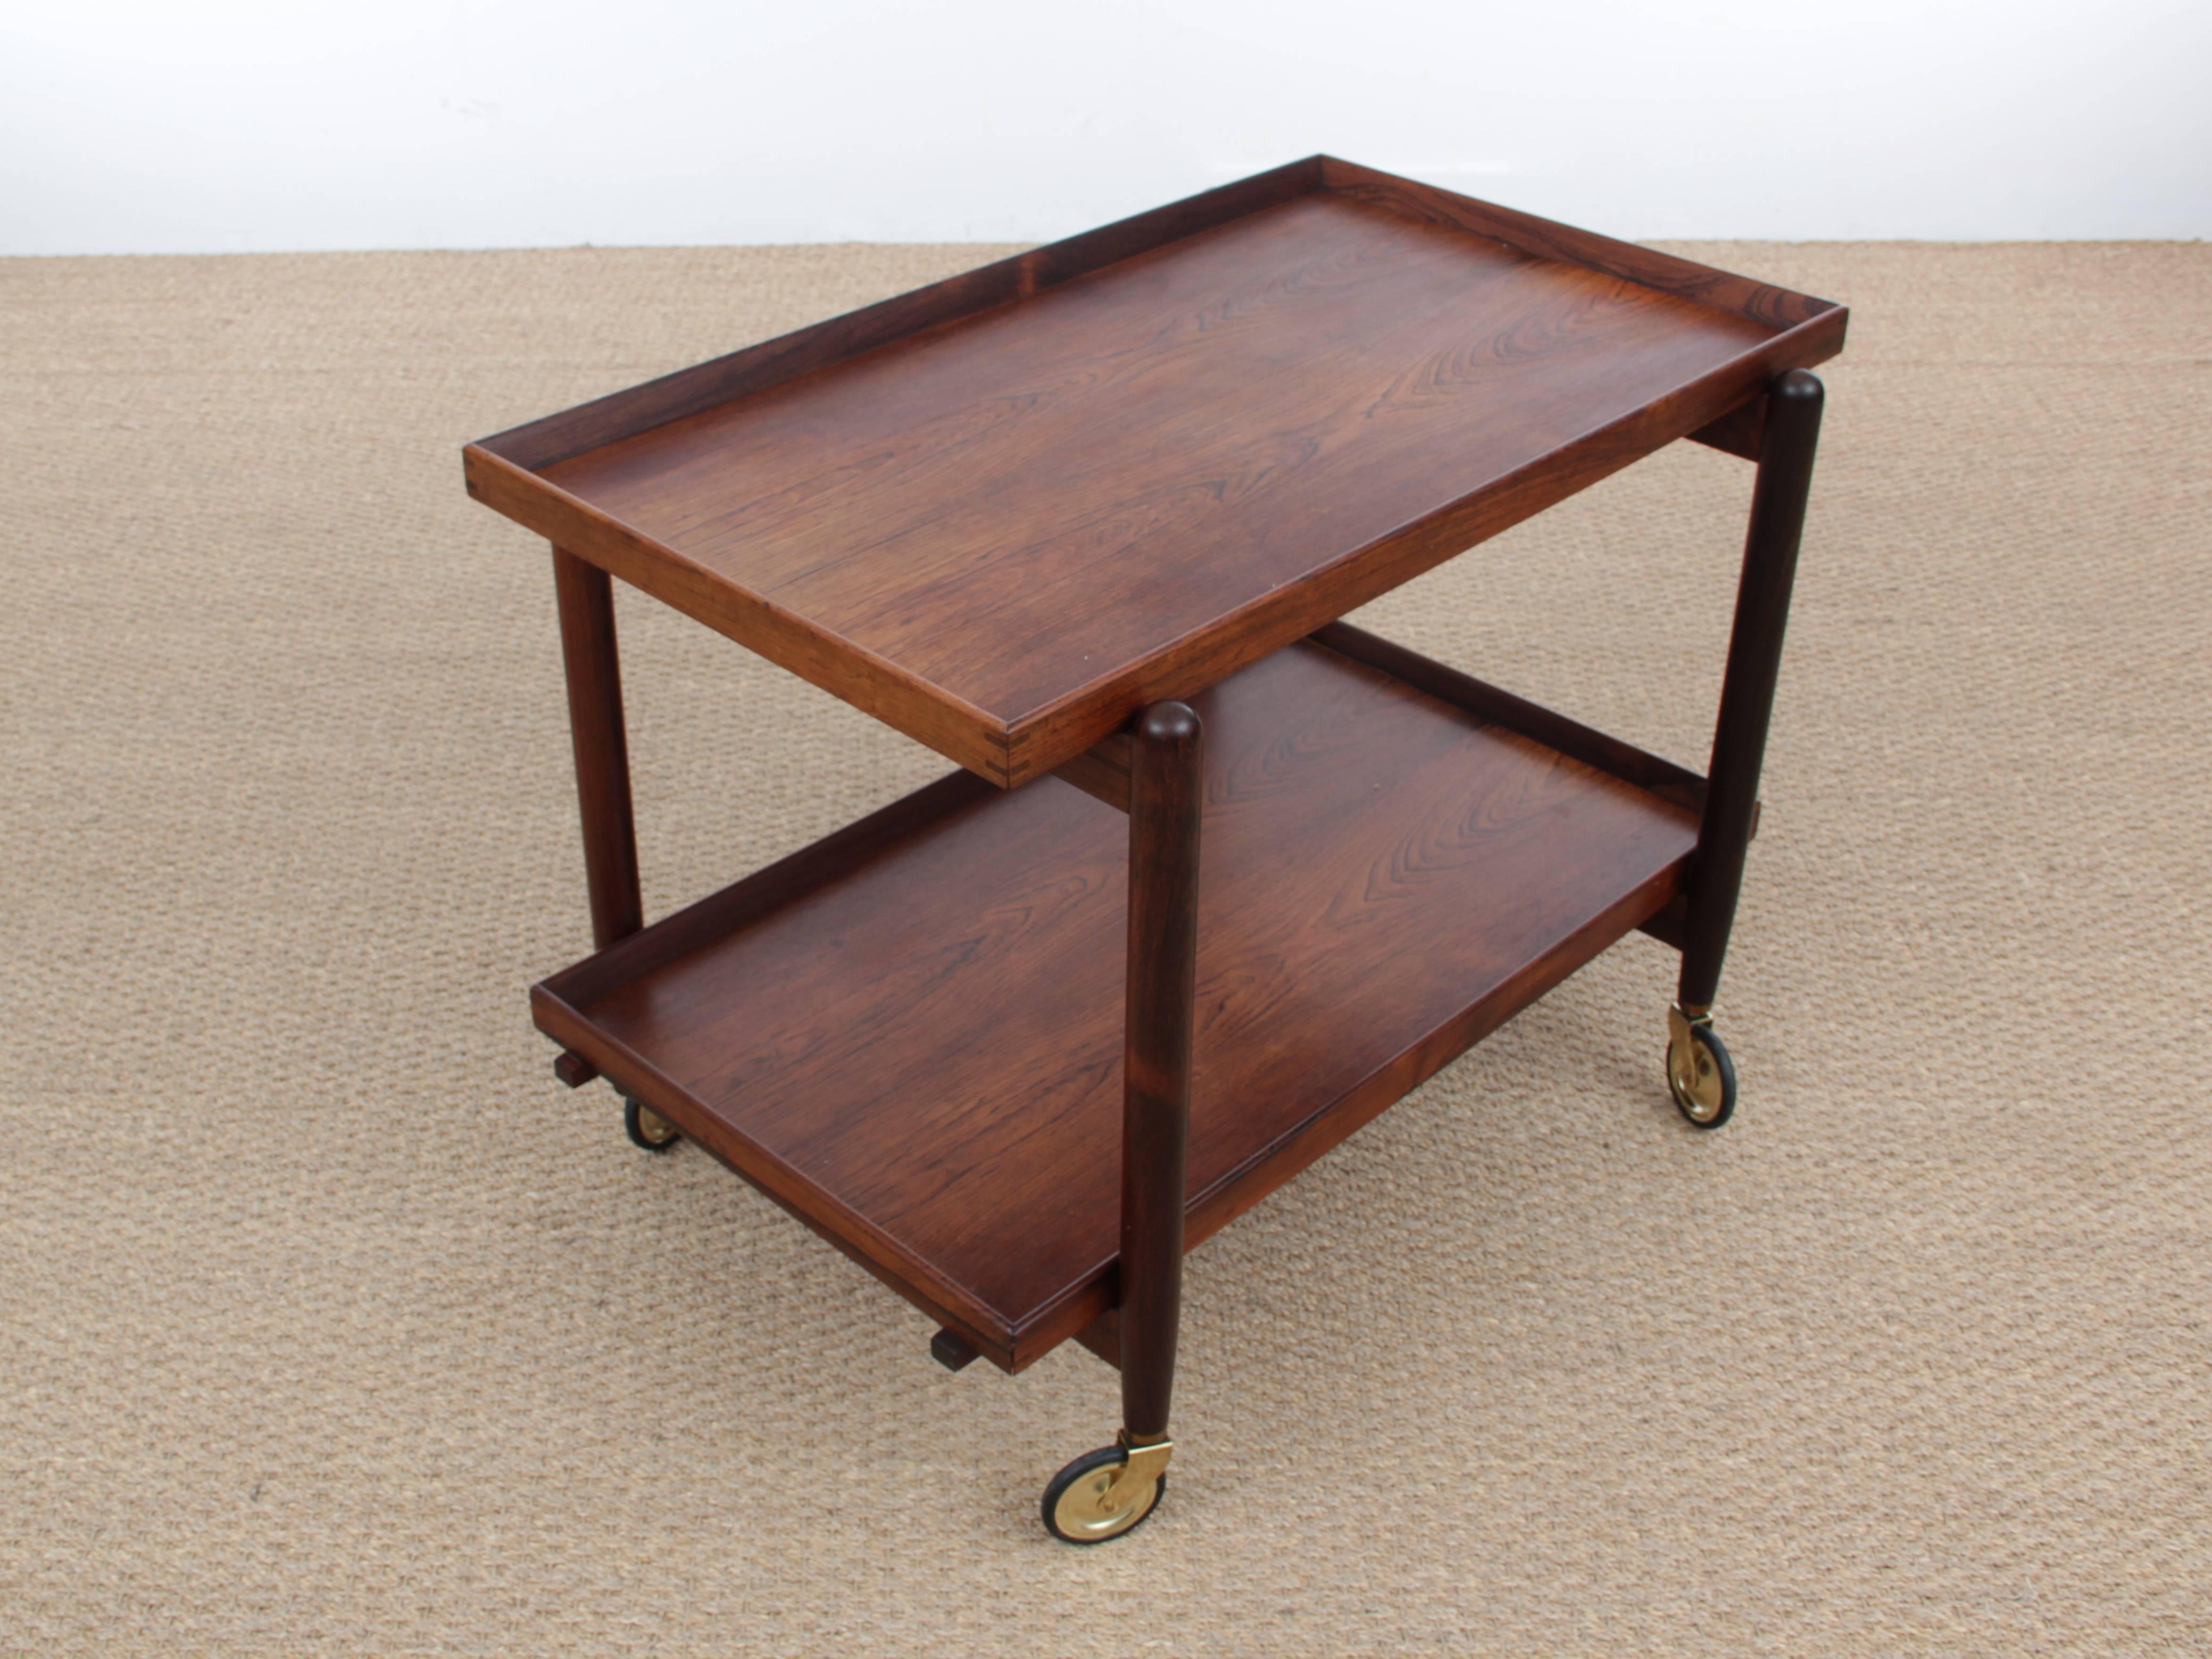 Midcentury Danish Serving Cart in Rosewood by Poul Hundevad 1